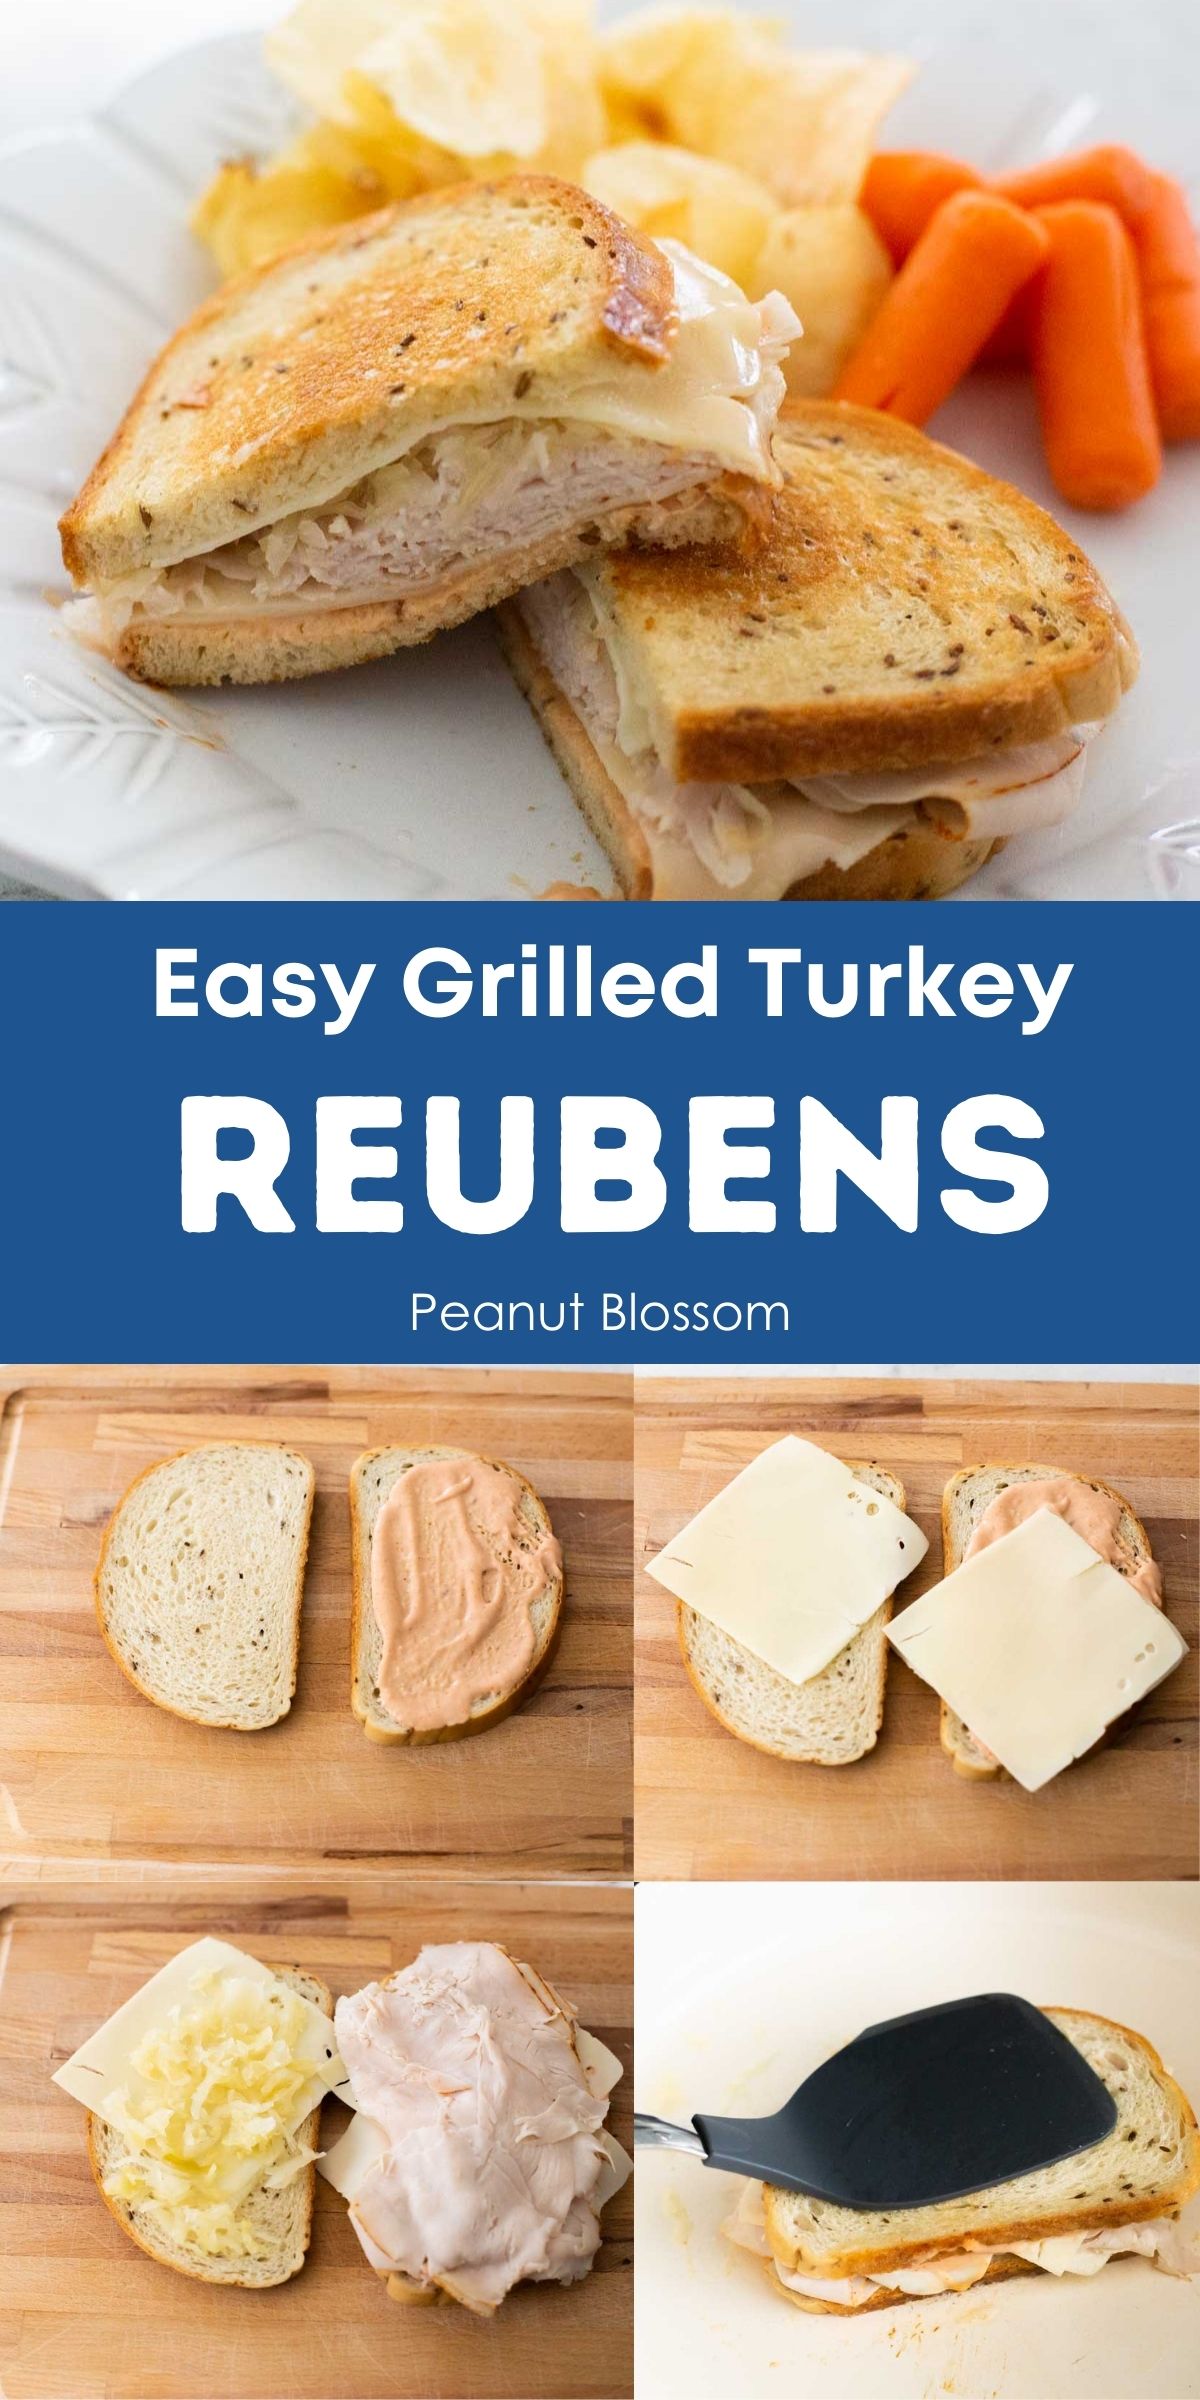 A photo collage shows how to assemble the perfect grilled turkey reuben sandwich.